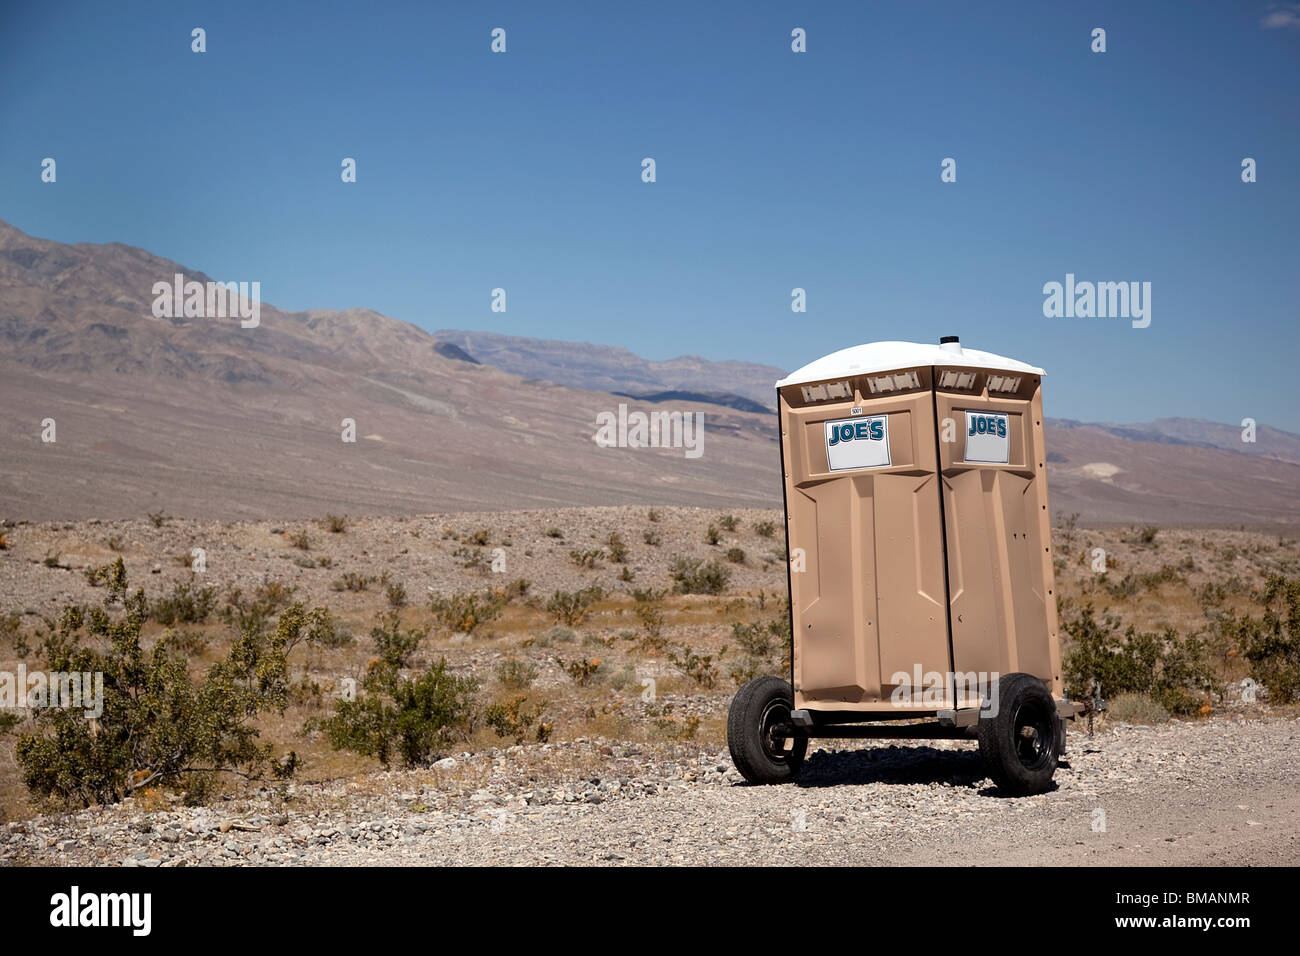 Mobile toilet ( Rest Rooms) in Death Valley California USA Stock Photo